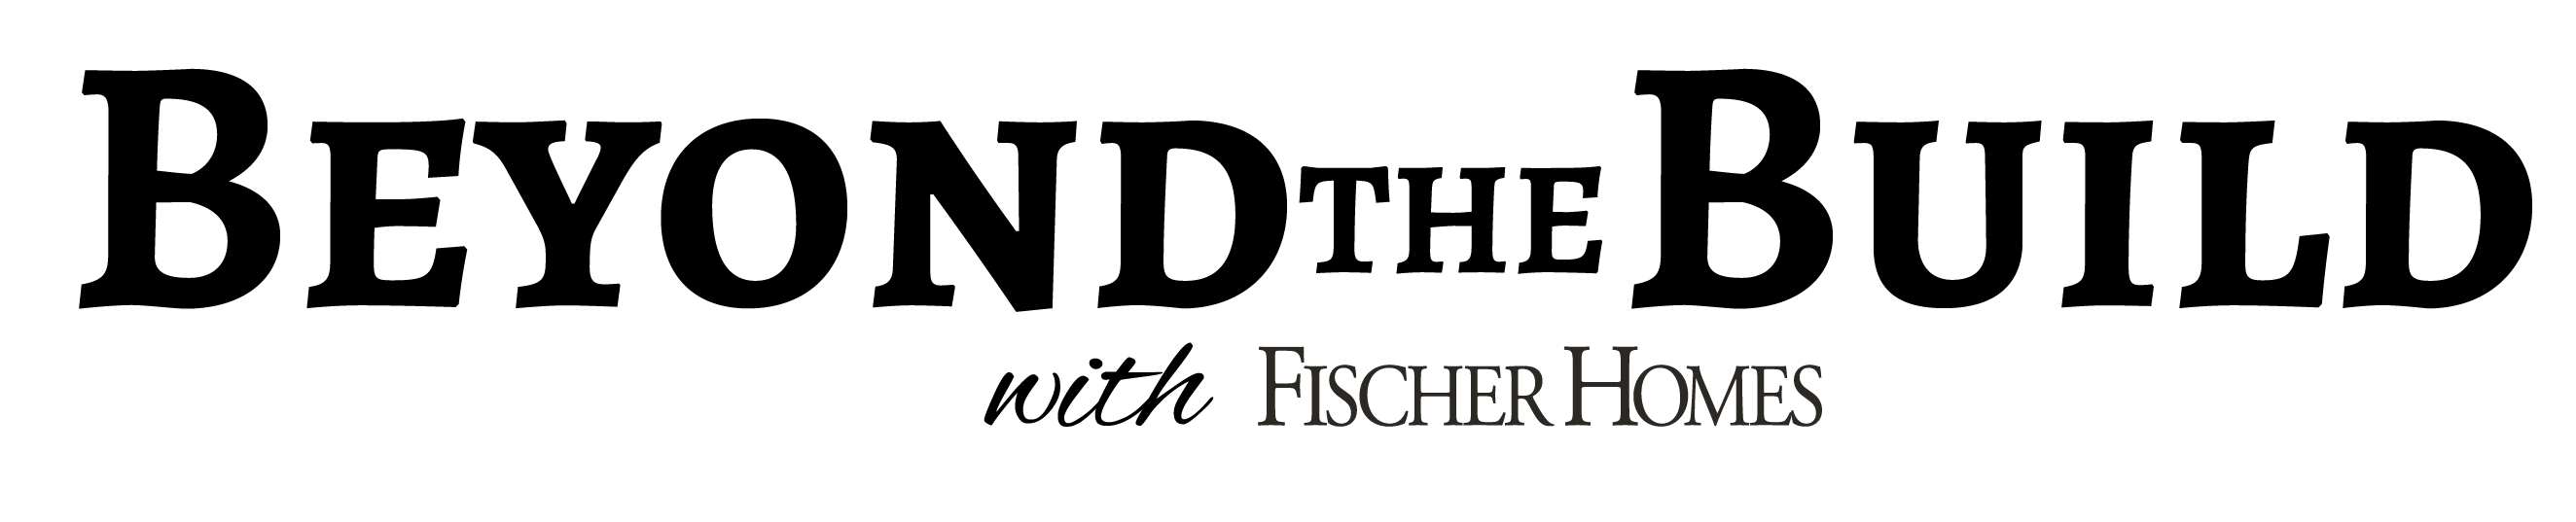 Fischer Homes is forever focused on continuing to go Beyond the Build, by continuing to build the best customer experience possible.